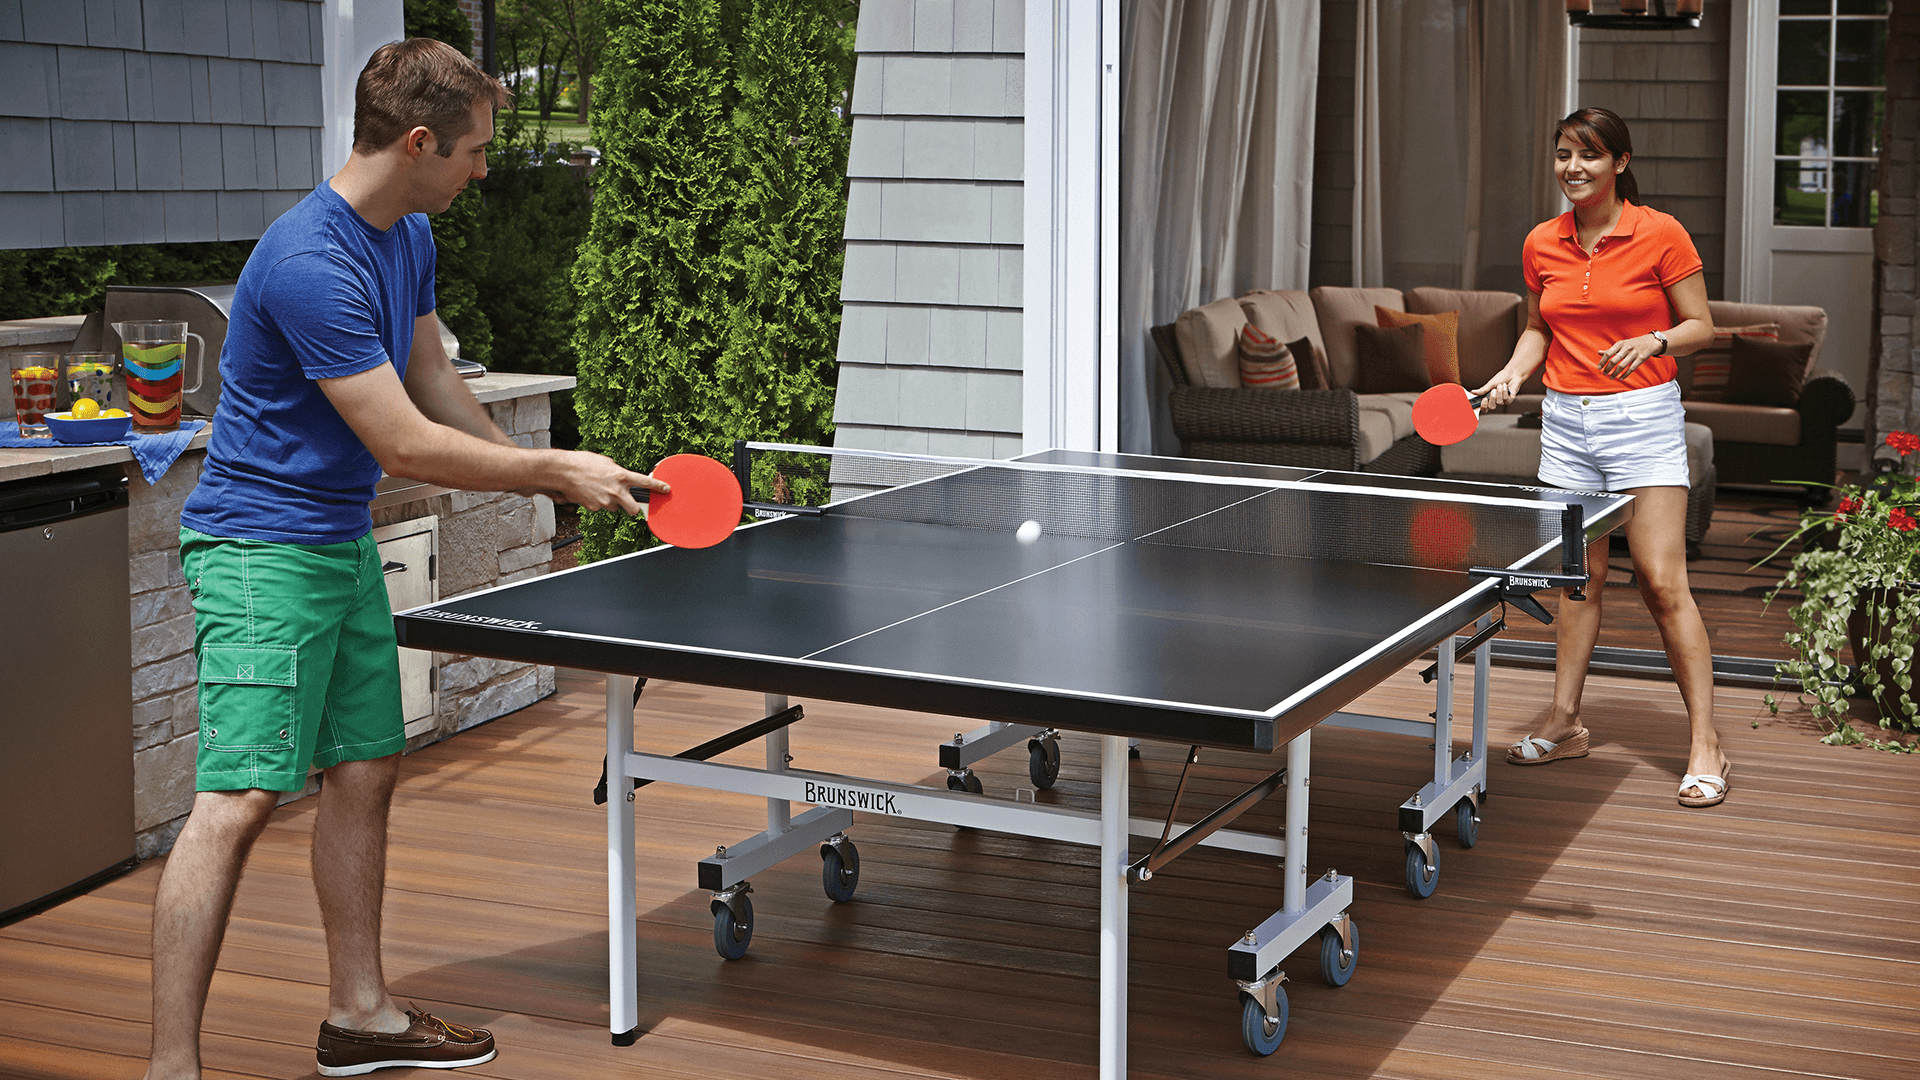 Smash 7.0 Table Tennis in home